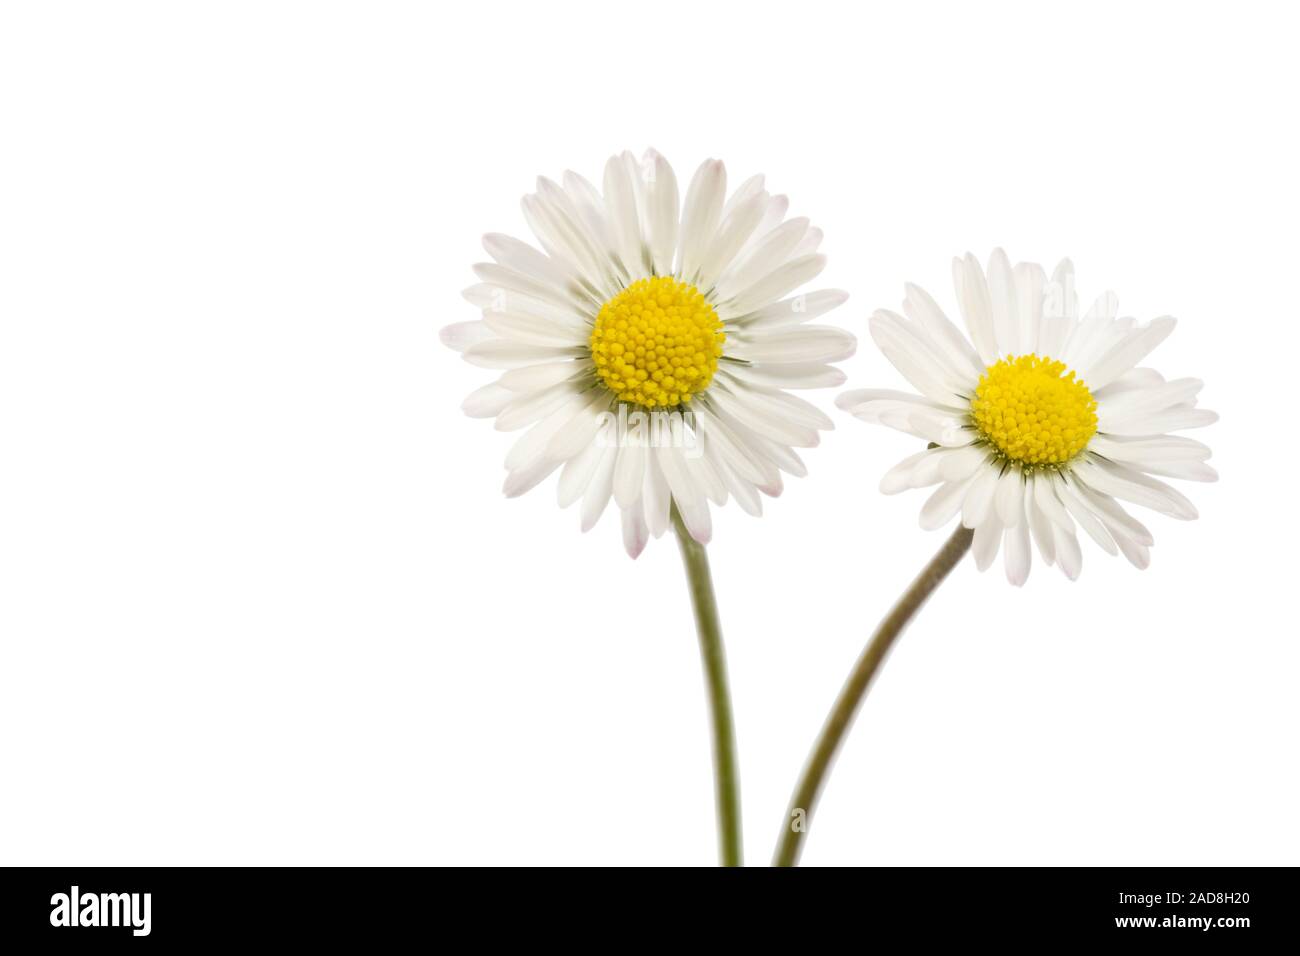 Daisy (Bellis perennis), close-up view Stock Photo